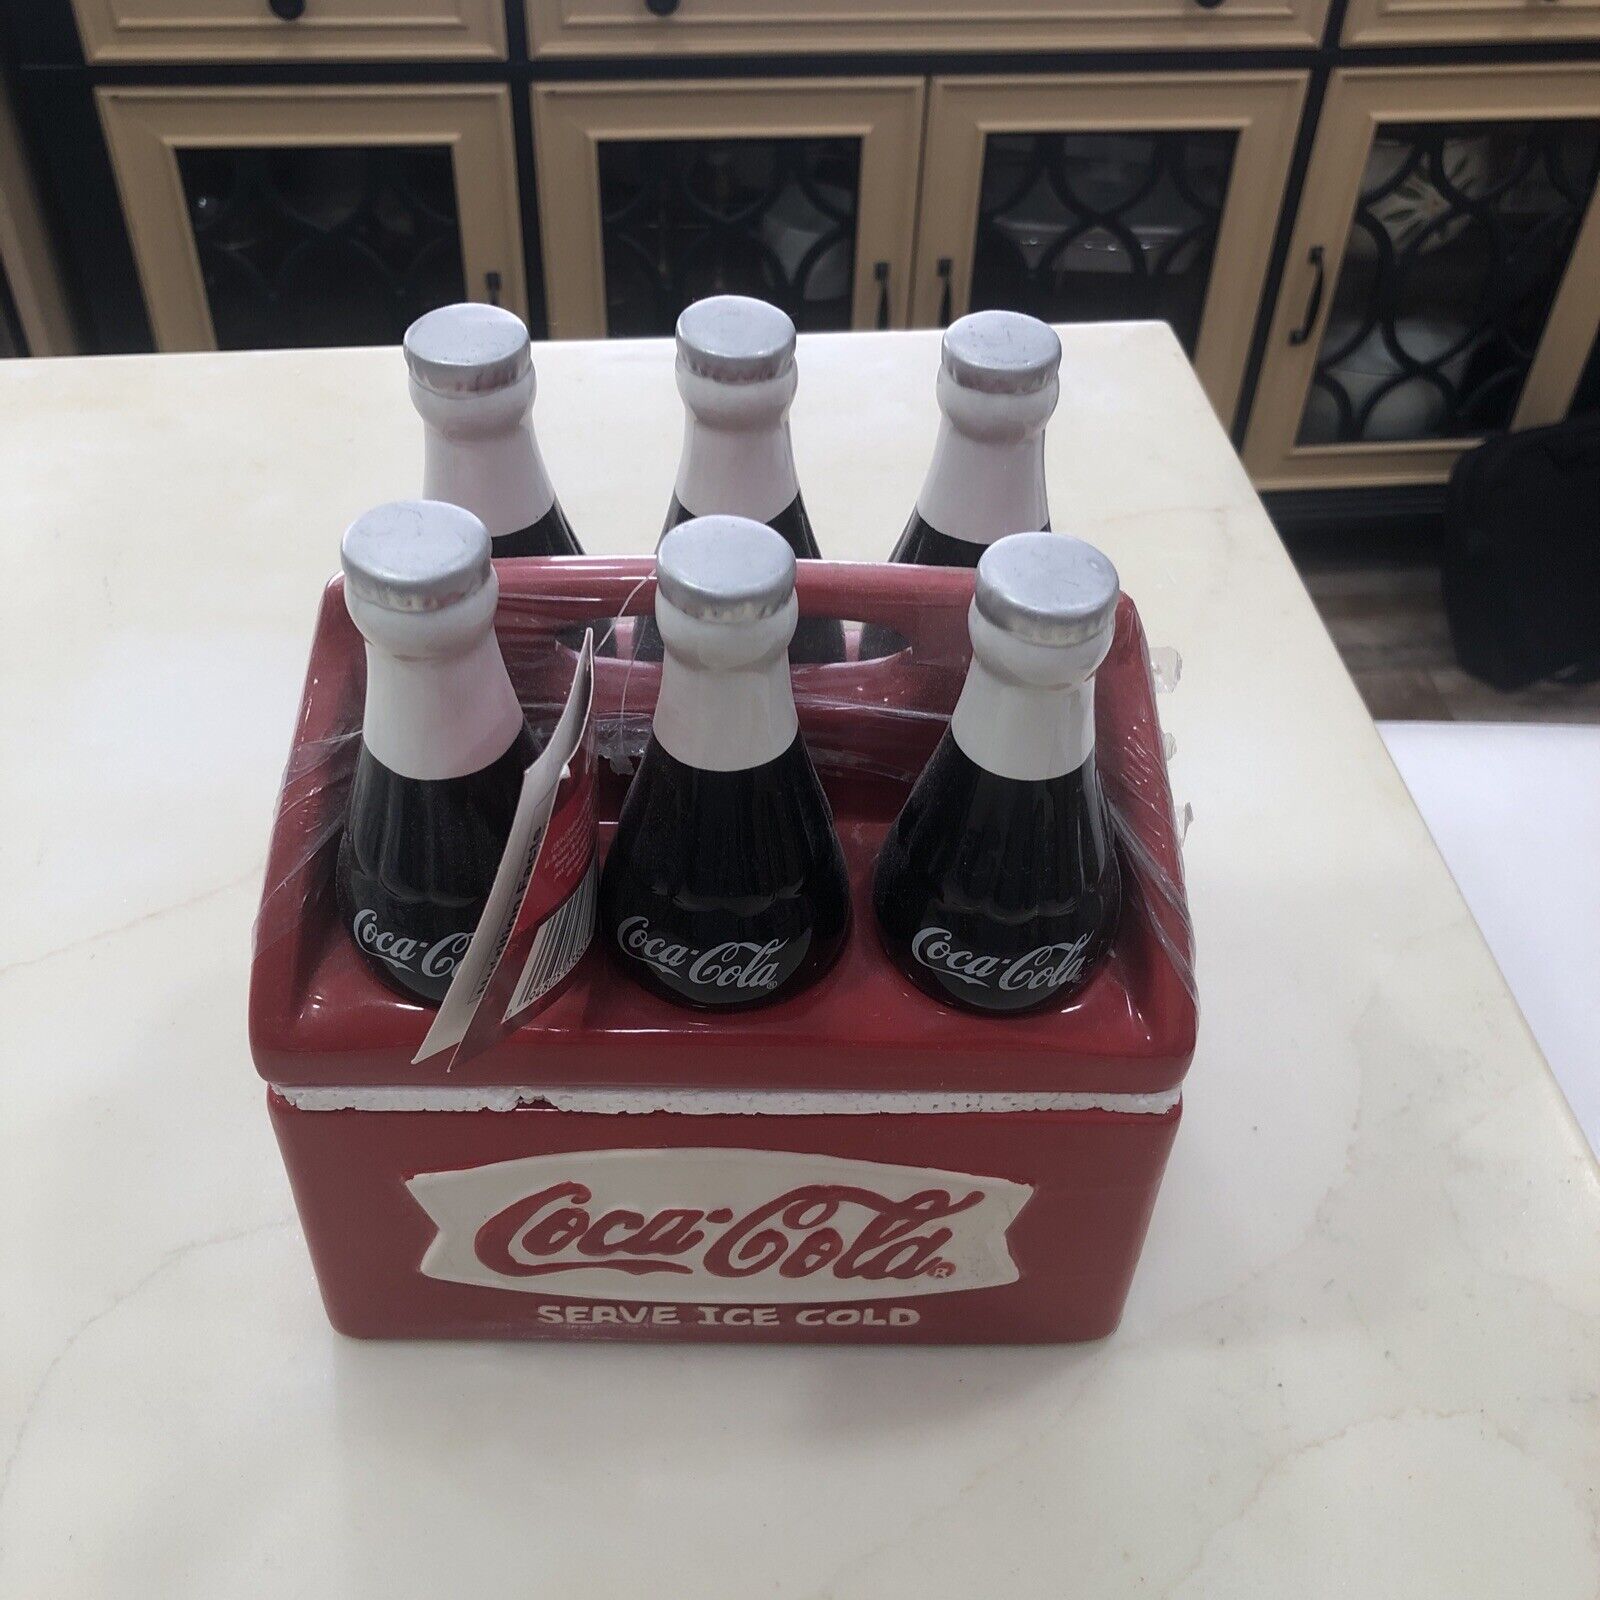 Coca Cola Cookie Jar Six Pack Coke Bottles 2001 Brand New Sealed With Cookies